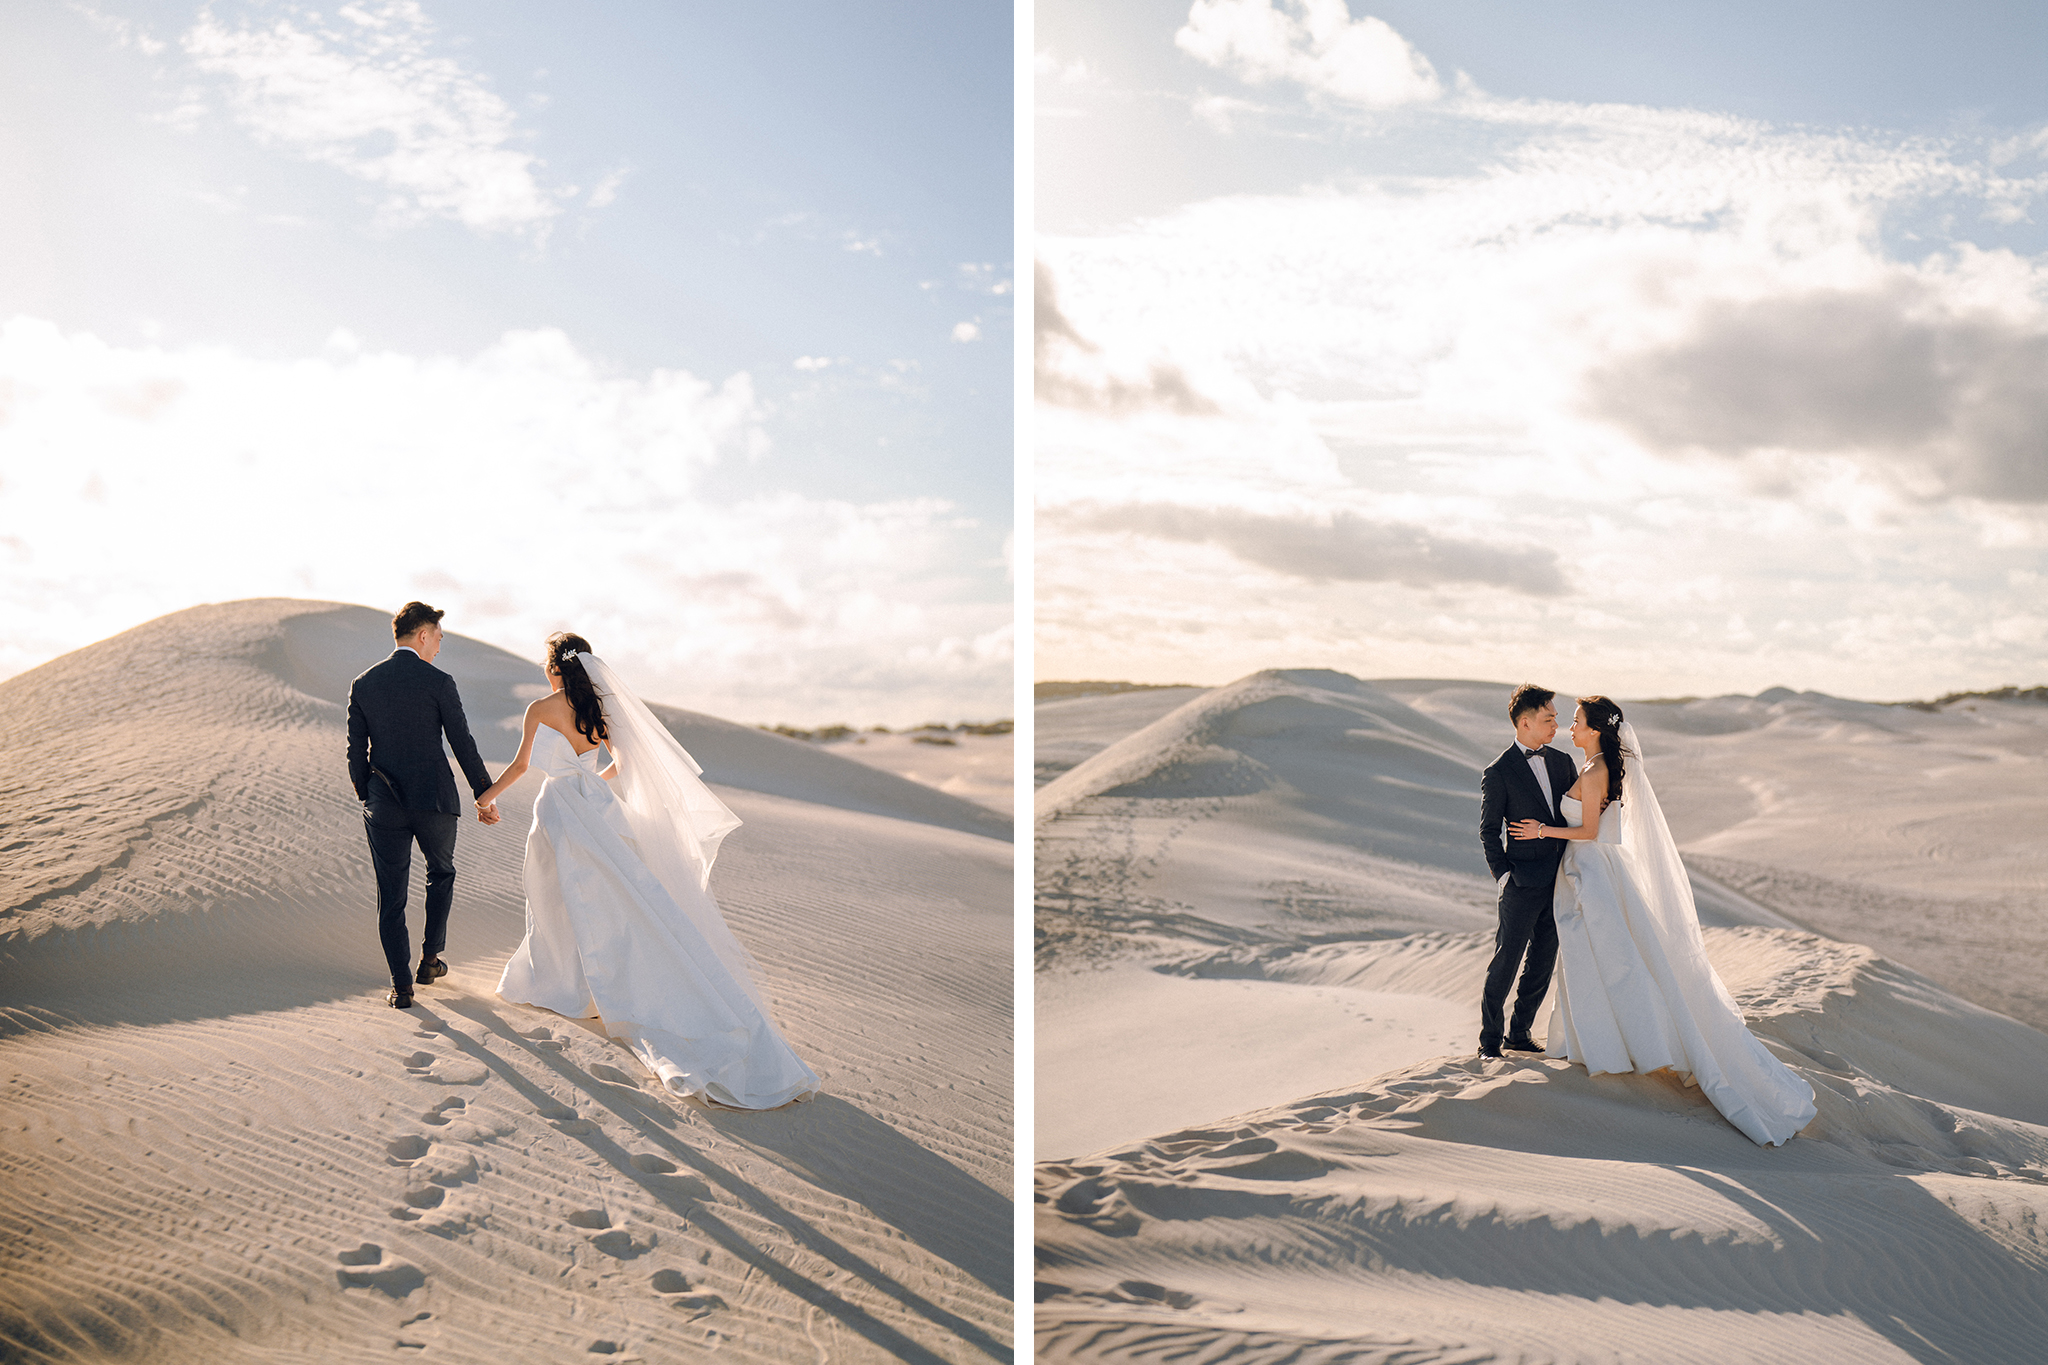 Perth Pre-Wedding Photoshoot at Lancelin Desert & Bells Lookout by Jimmy on OneThreeOneFour 18